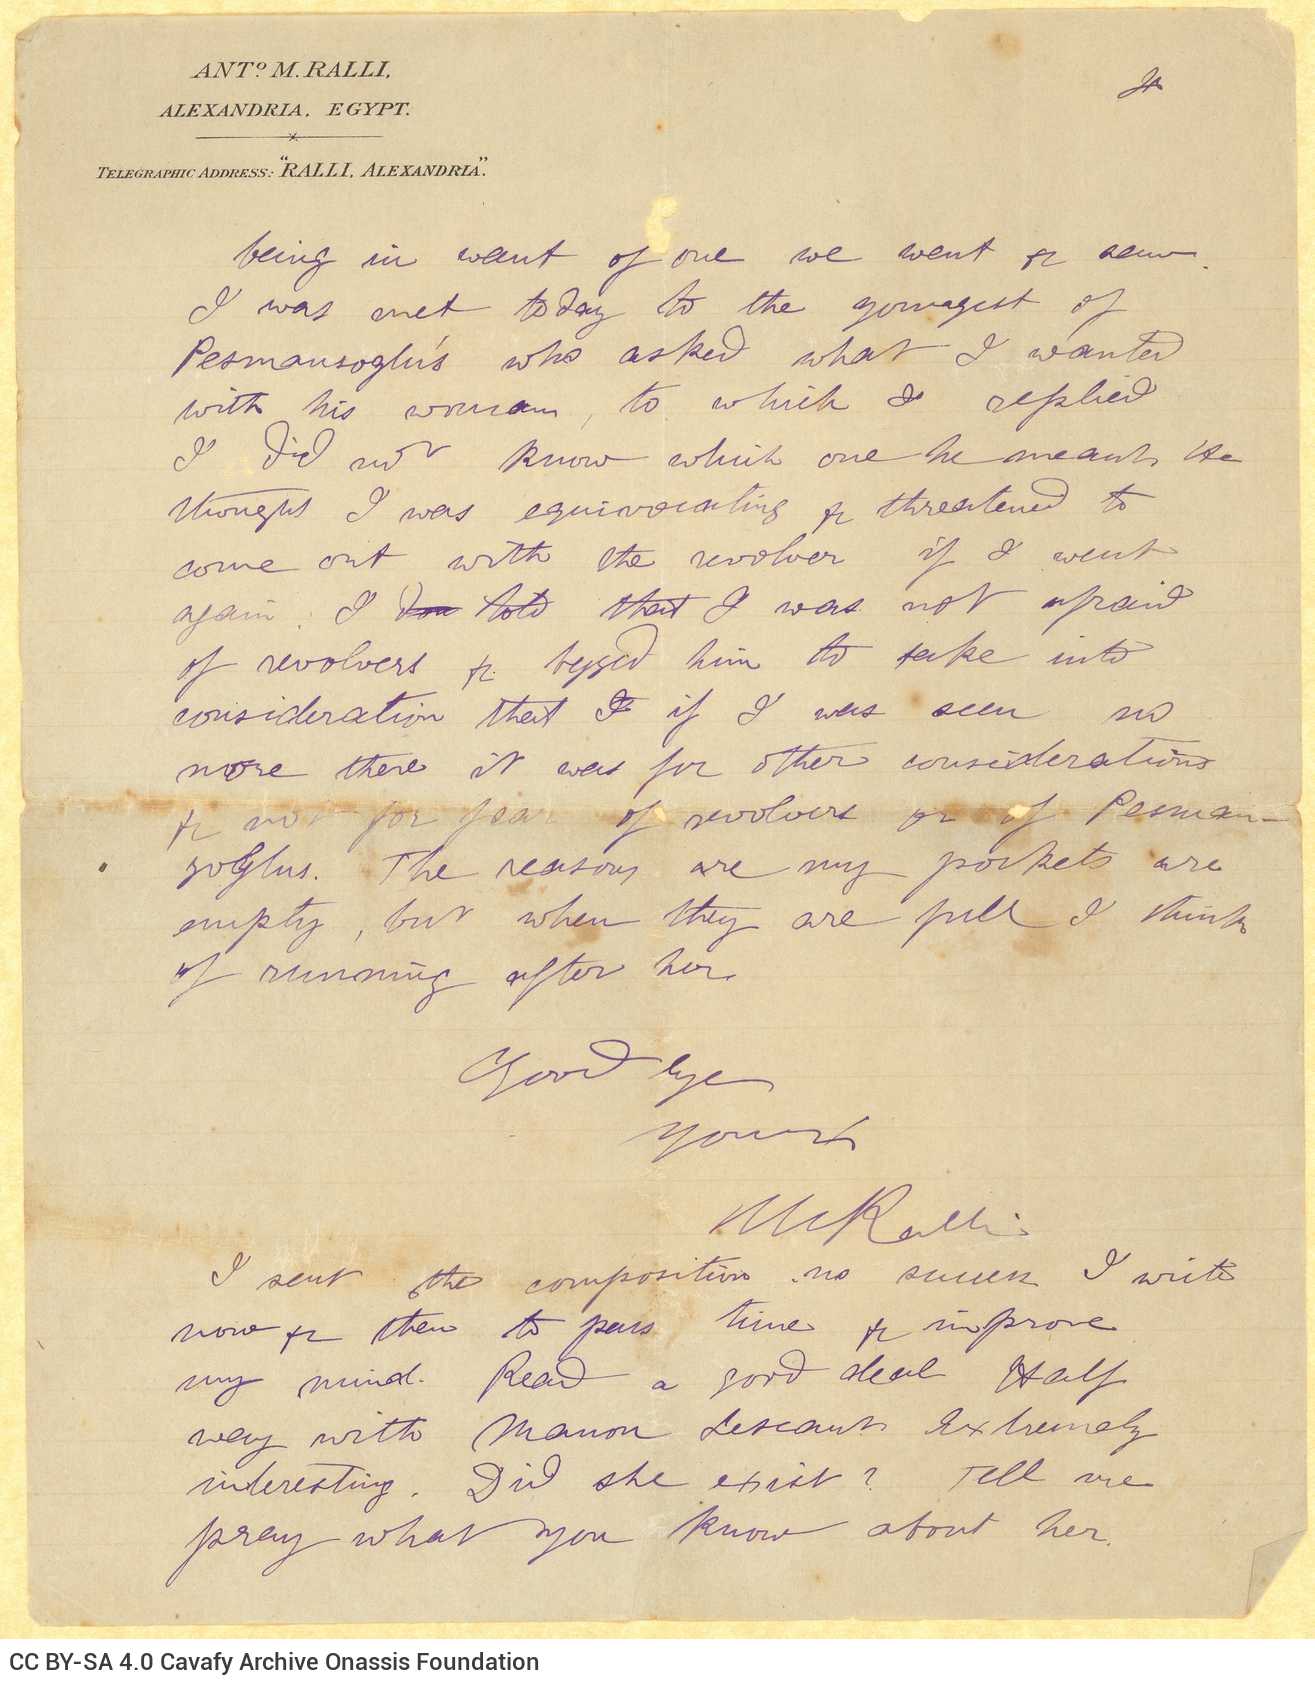 Handwritten letter by Mike Ralli to Cavafy on the recto of four sheets. The author describes his everyday life in Ramli and c